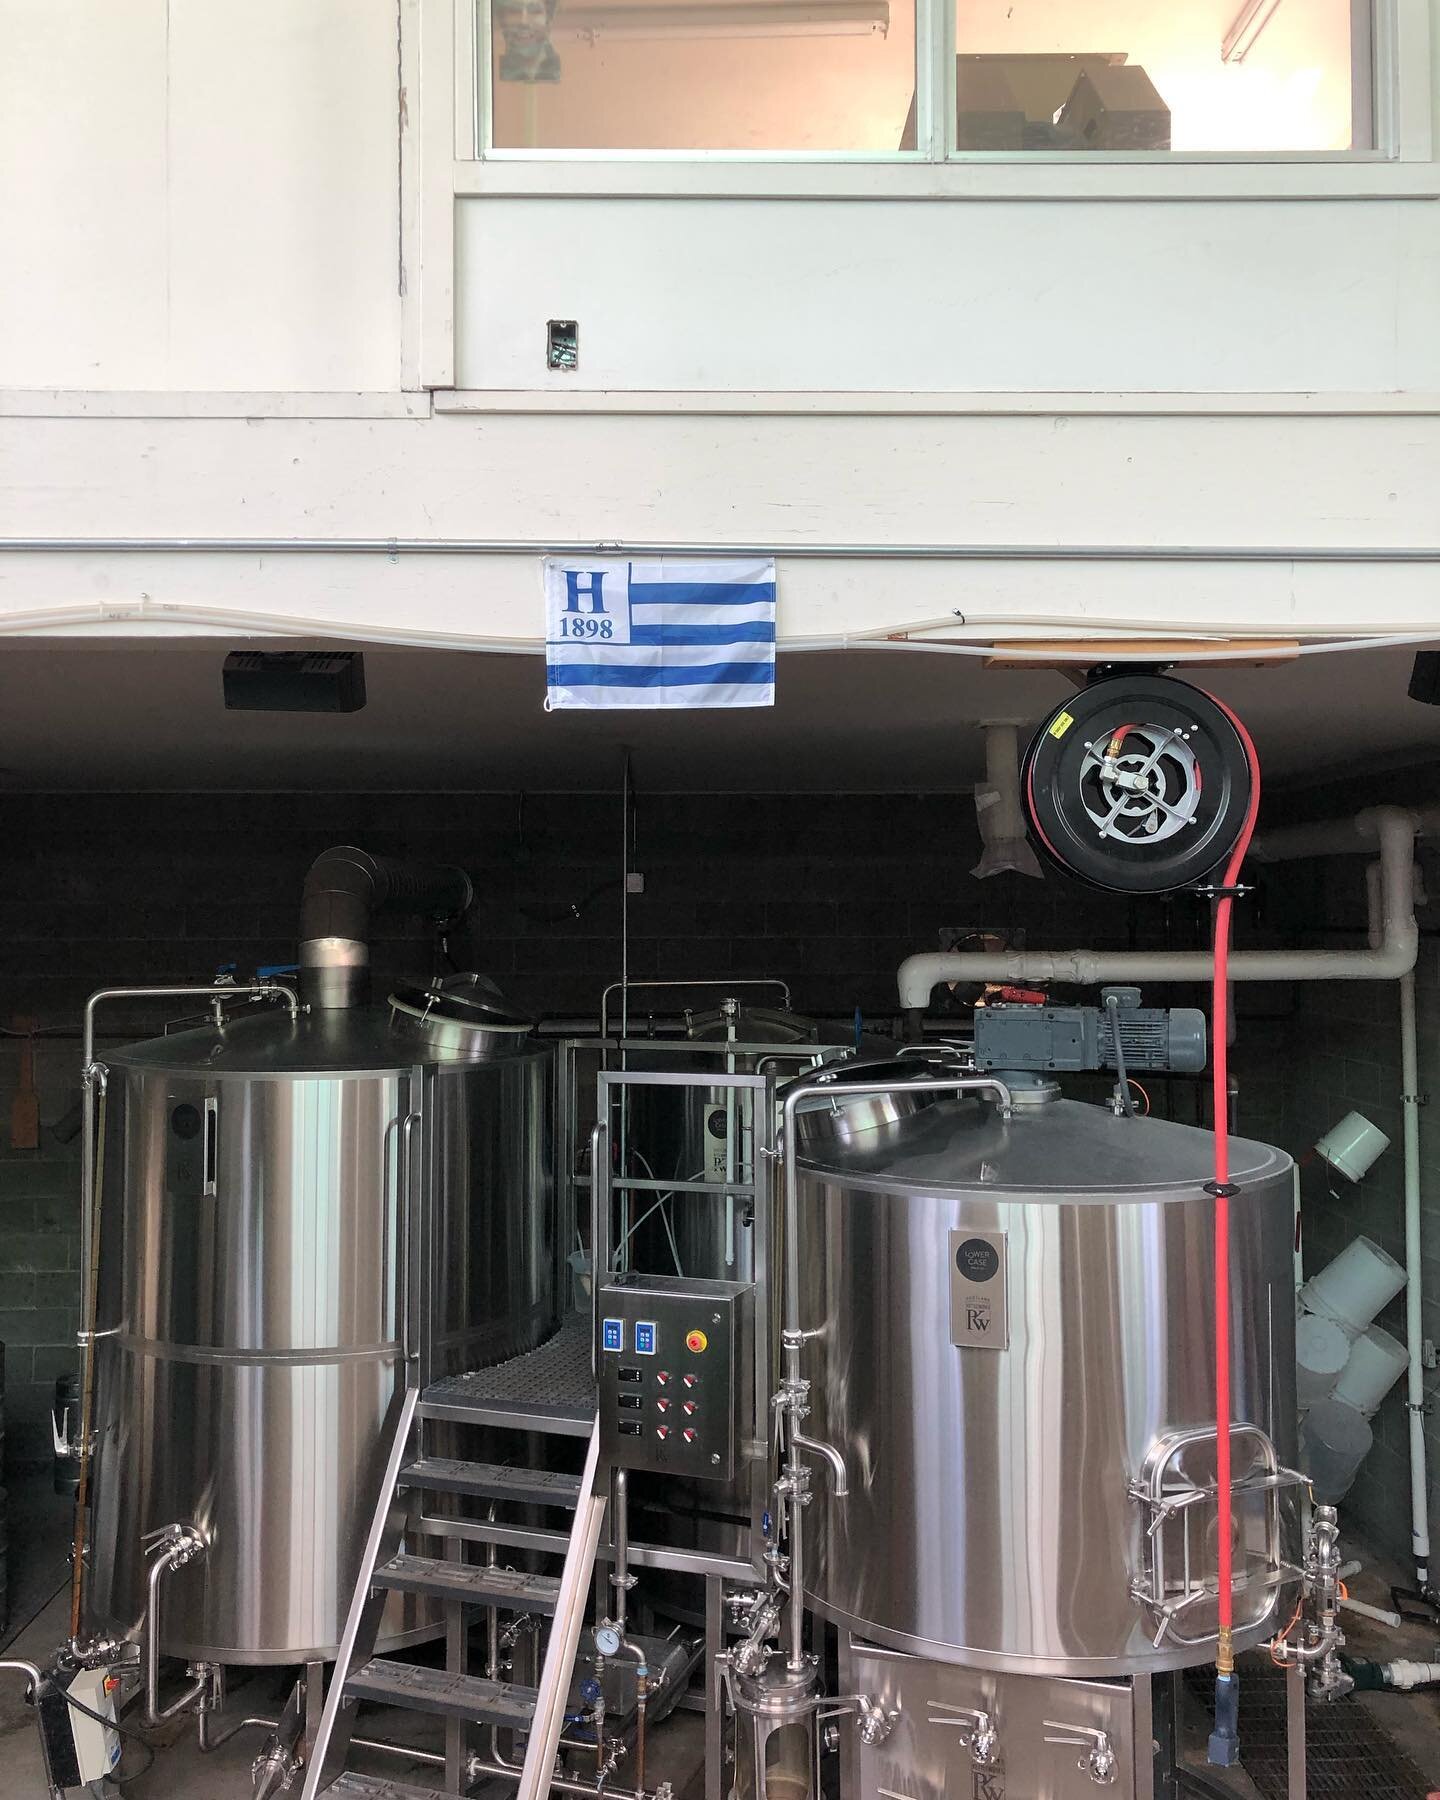 We&rsquo;re not big on displaying &ldquo;pieces of flair&rdquo; at the brewery but this was too cool. It&rsquo;s a flag from our friend, Tabea, whose home is in Dortmund, Germany. It is the flag of her rowing club and she wanted us to have a piece of